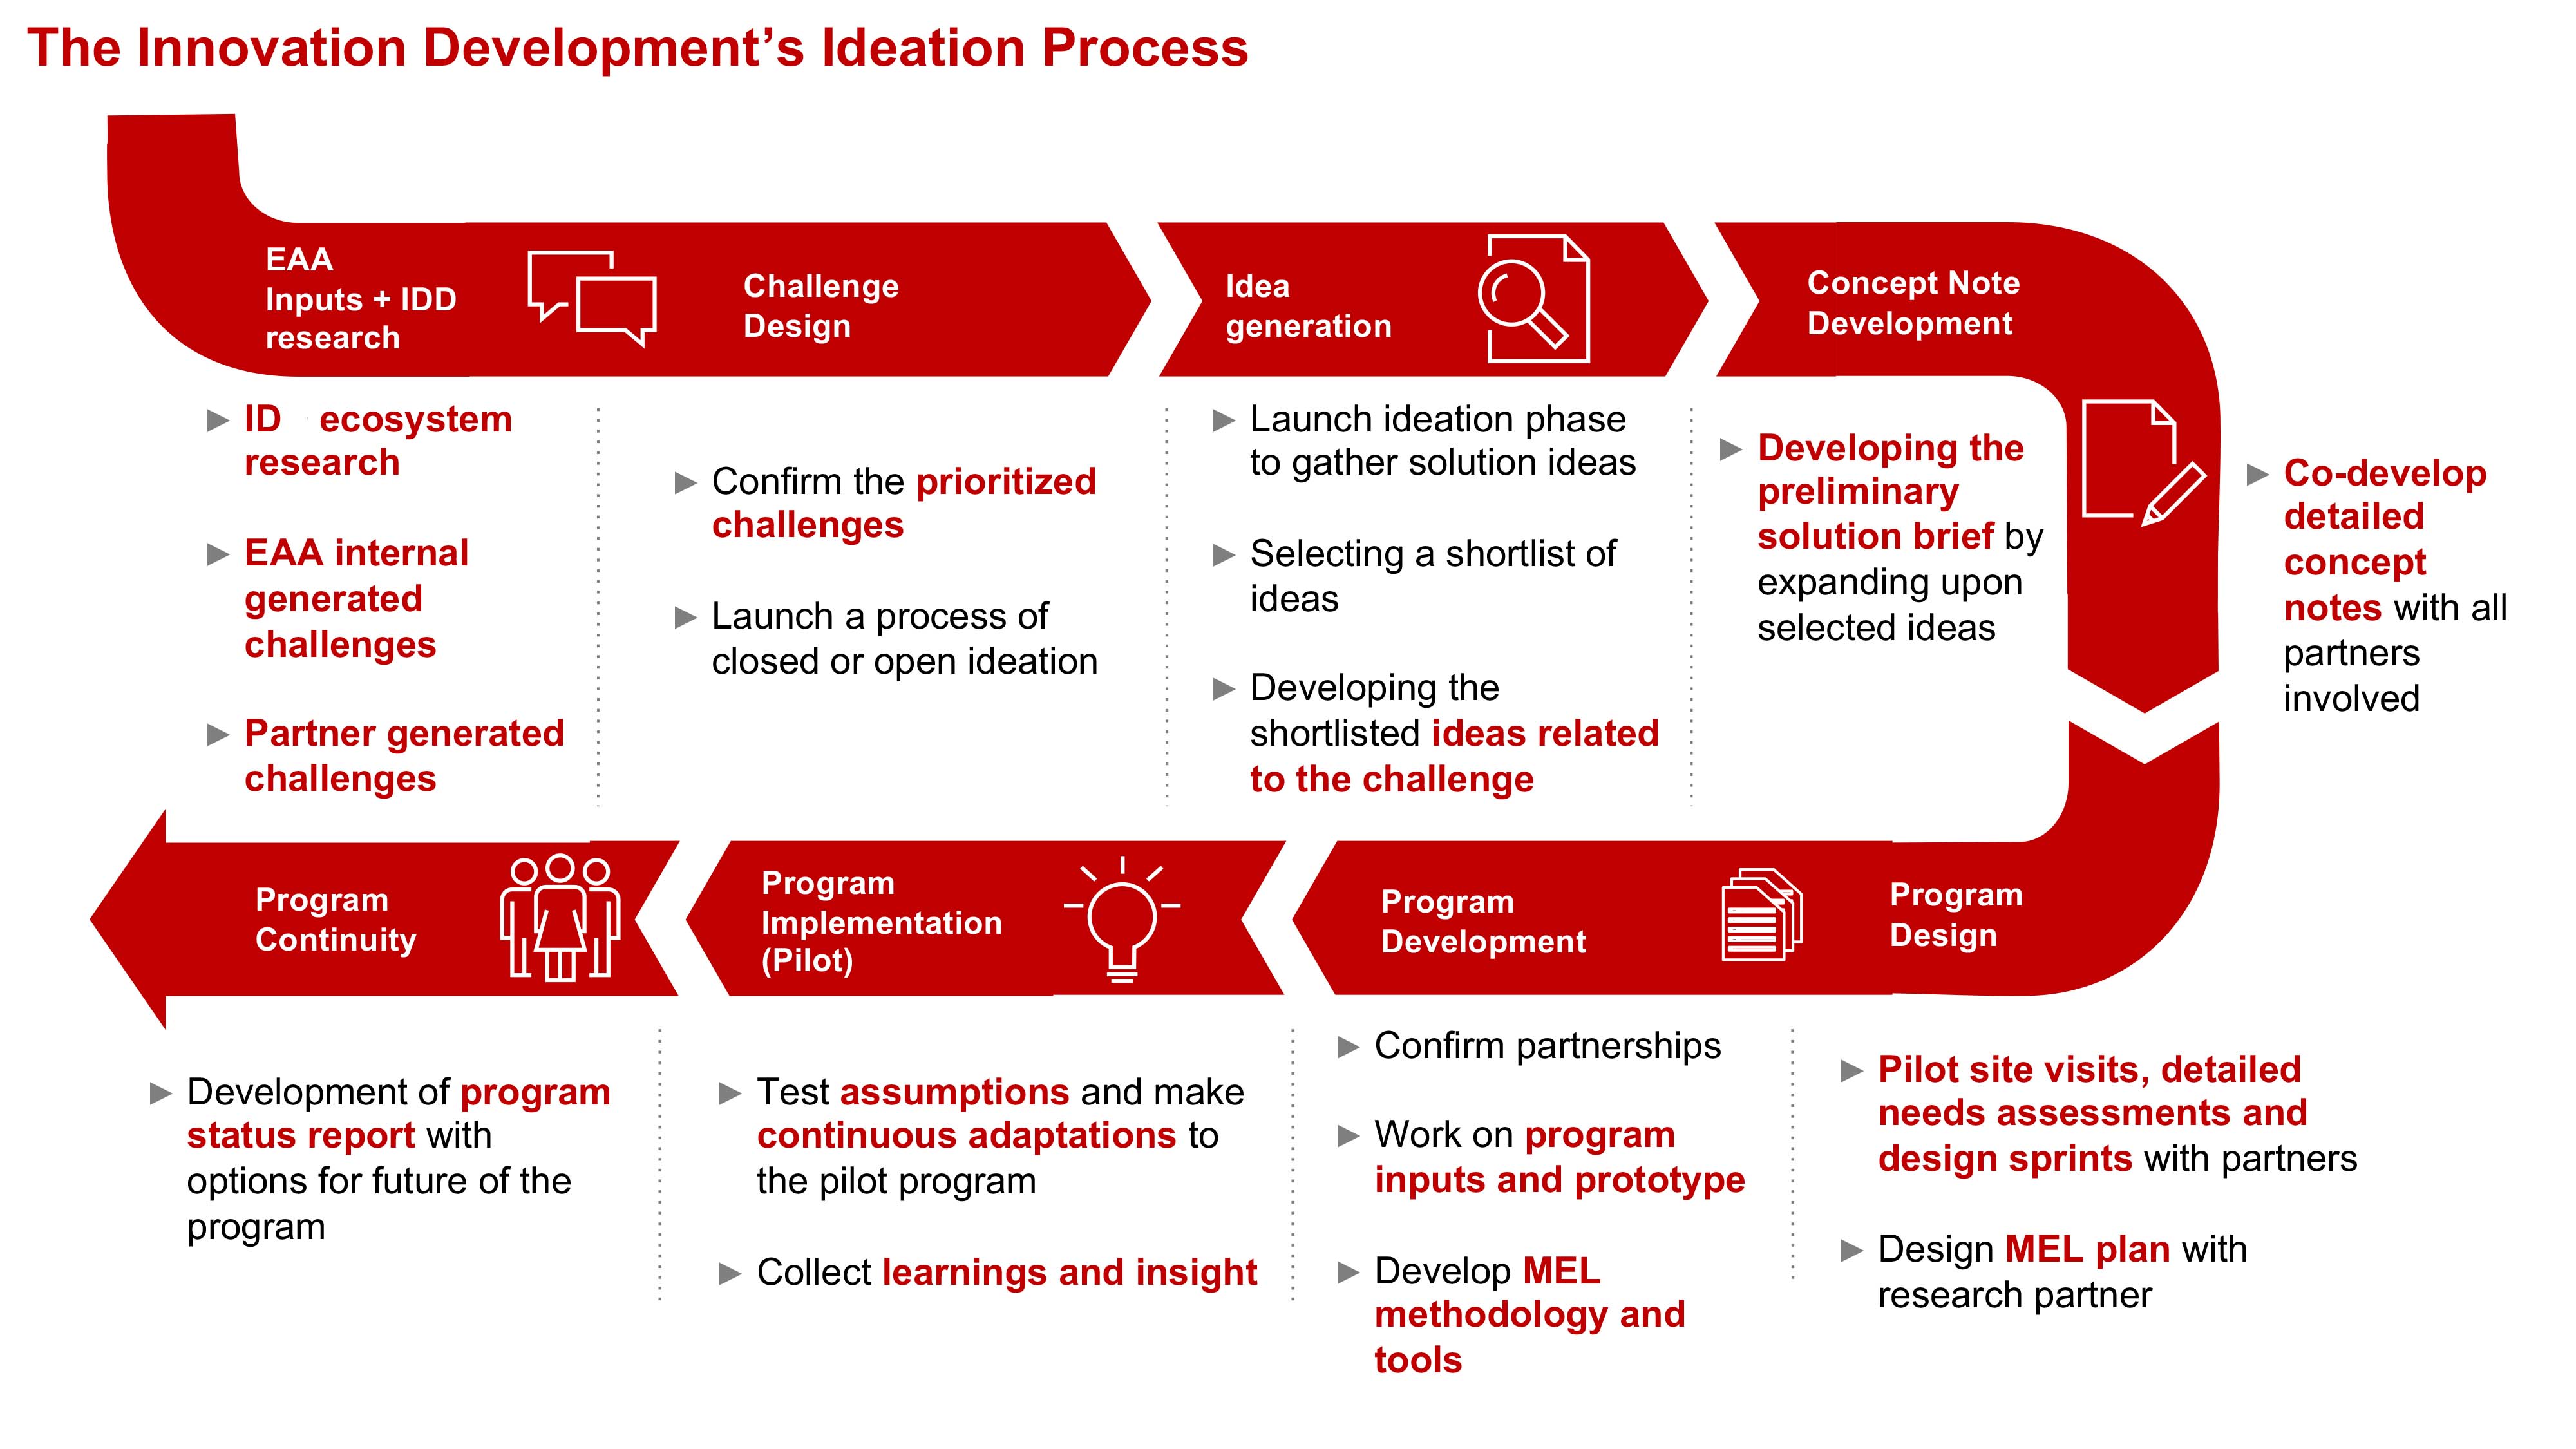 The Innovation Development’s Ideation Process Diagram